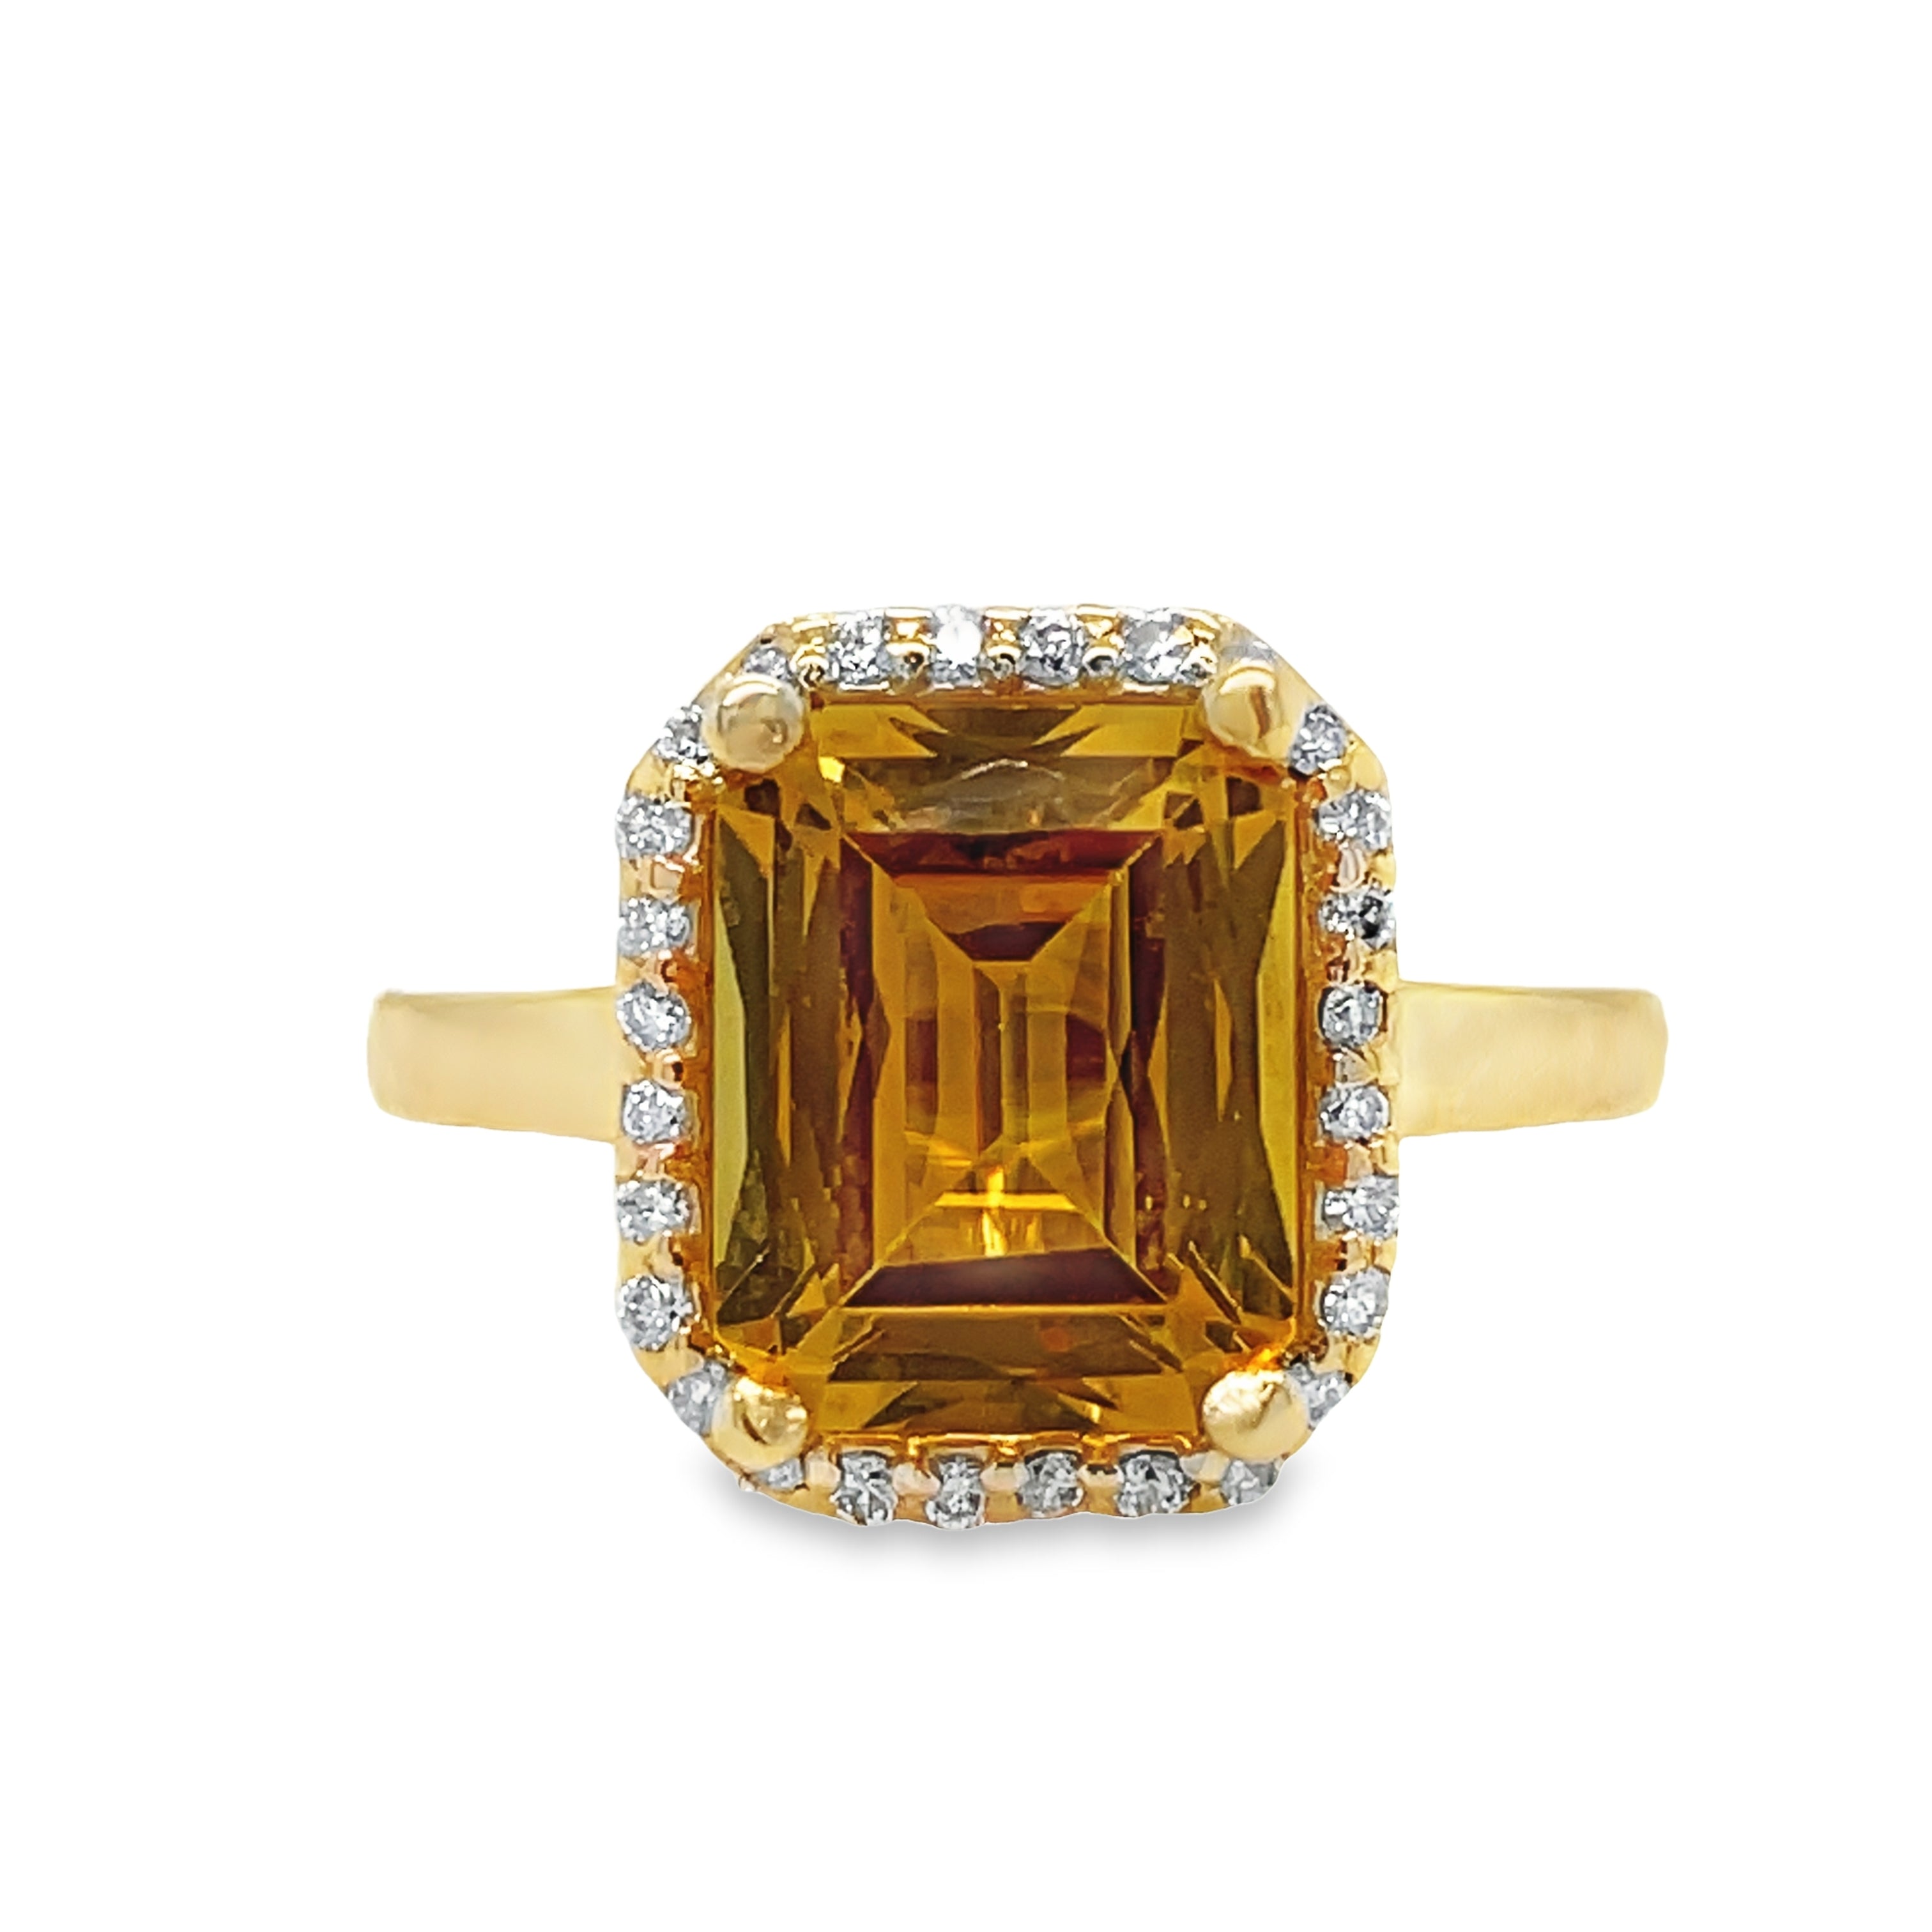 Elegant cathedral-style ring crafted from 14k yellow gold with a square citrine and diamond bezel, featuring 0.25 cts of round diamonds. Perfect for adding a touch of sophistication to any outfit.